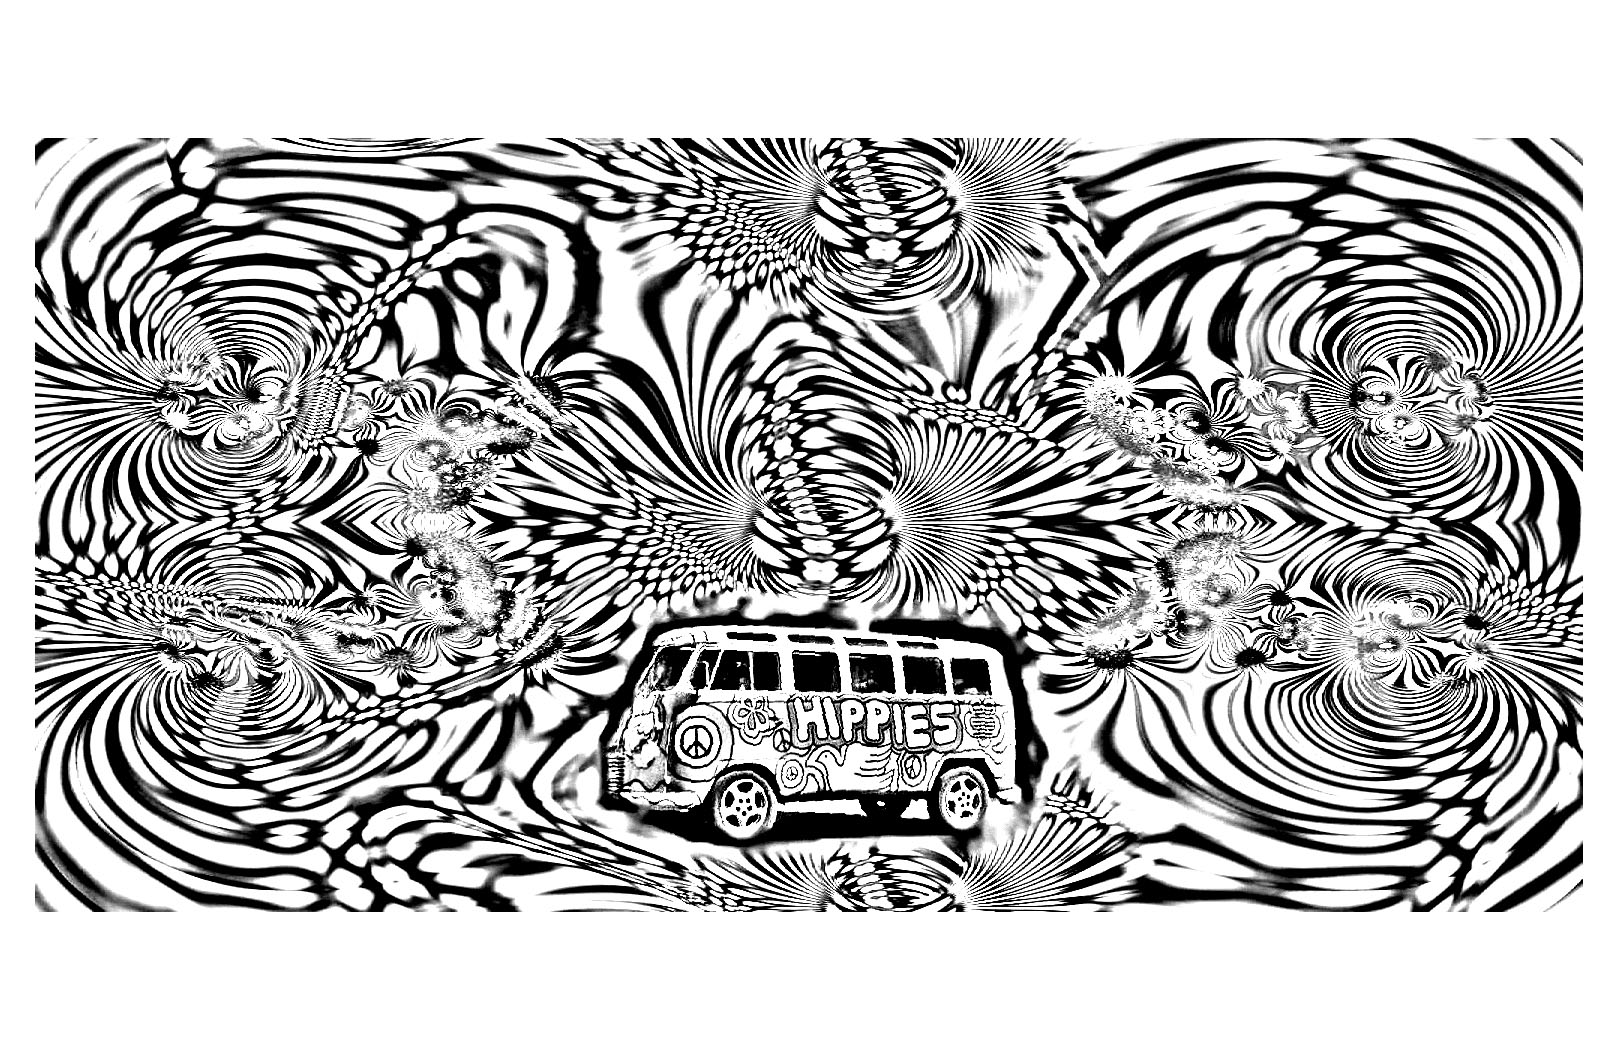 Typical bus of the 70s in the middle of a psychedelic and hypnotic sky